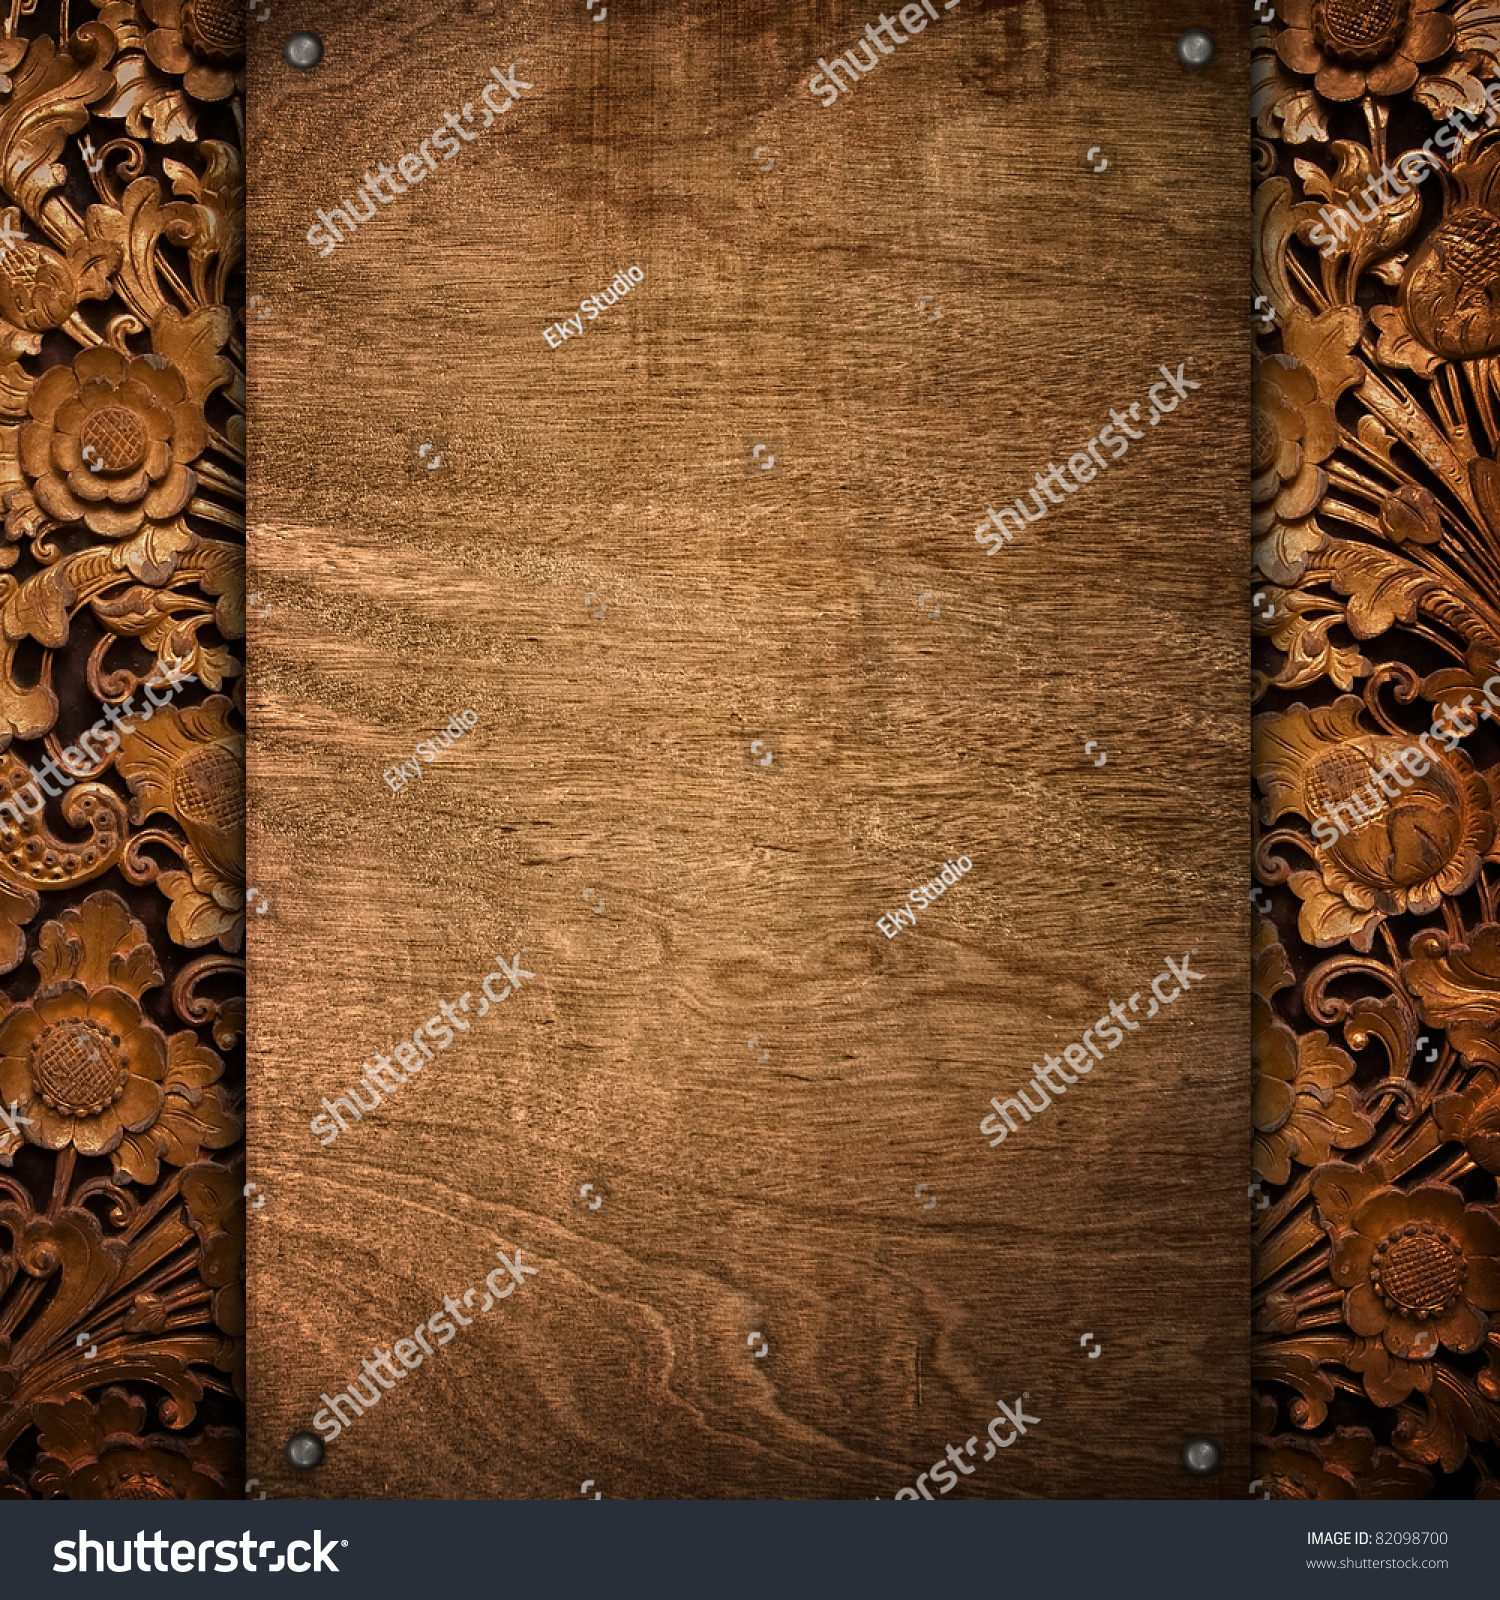 Wood Background Carving Pattern Stock Photo 82098700 - Shutterstock